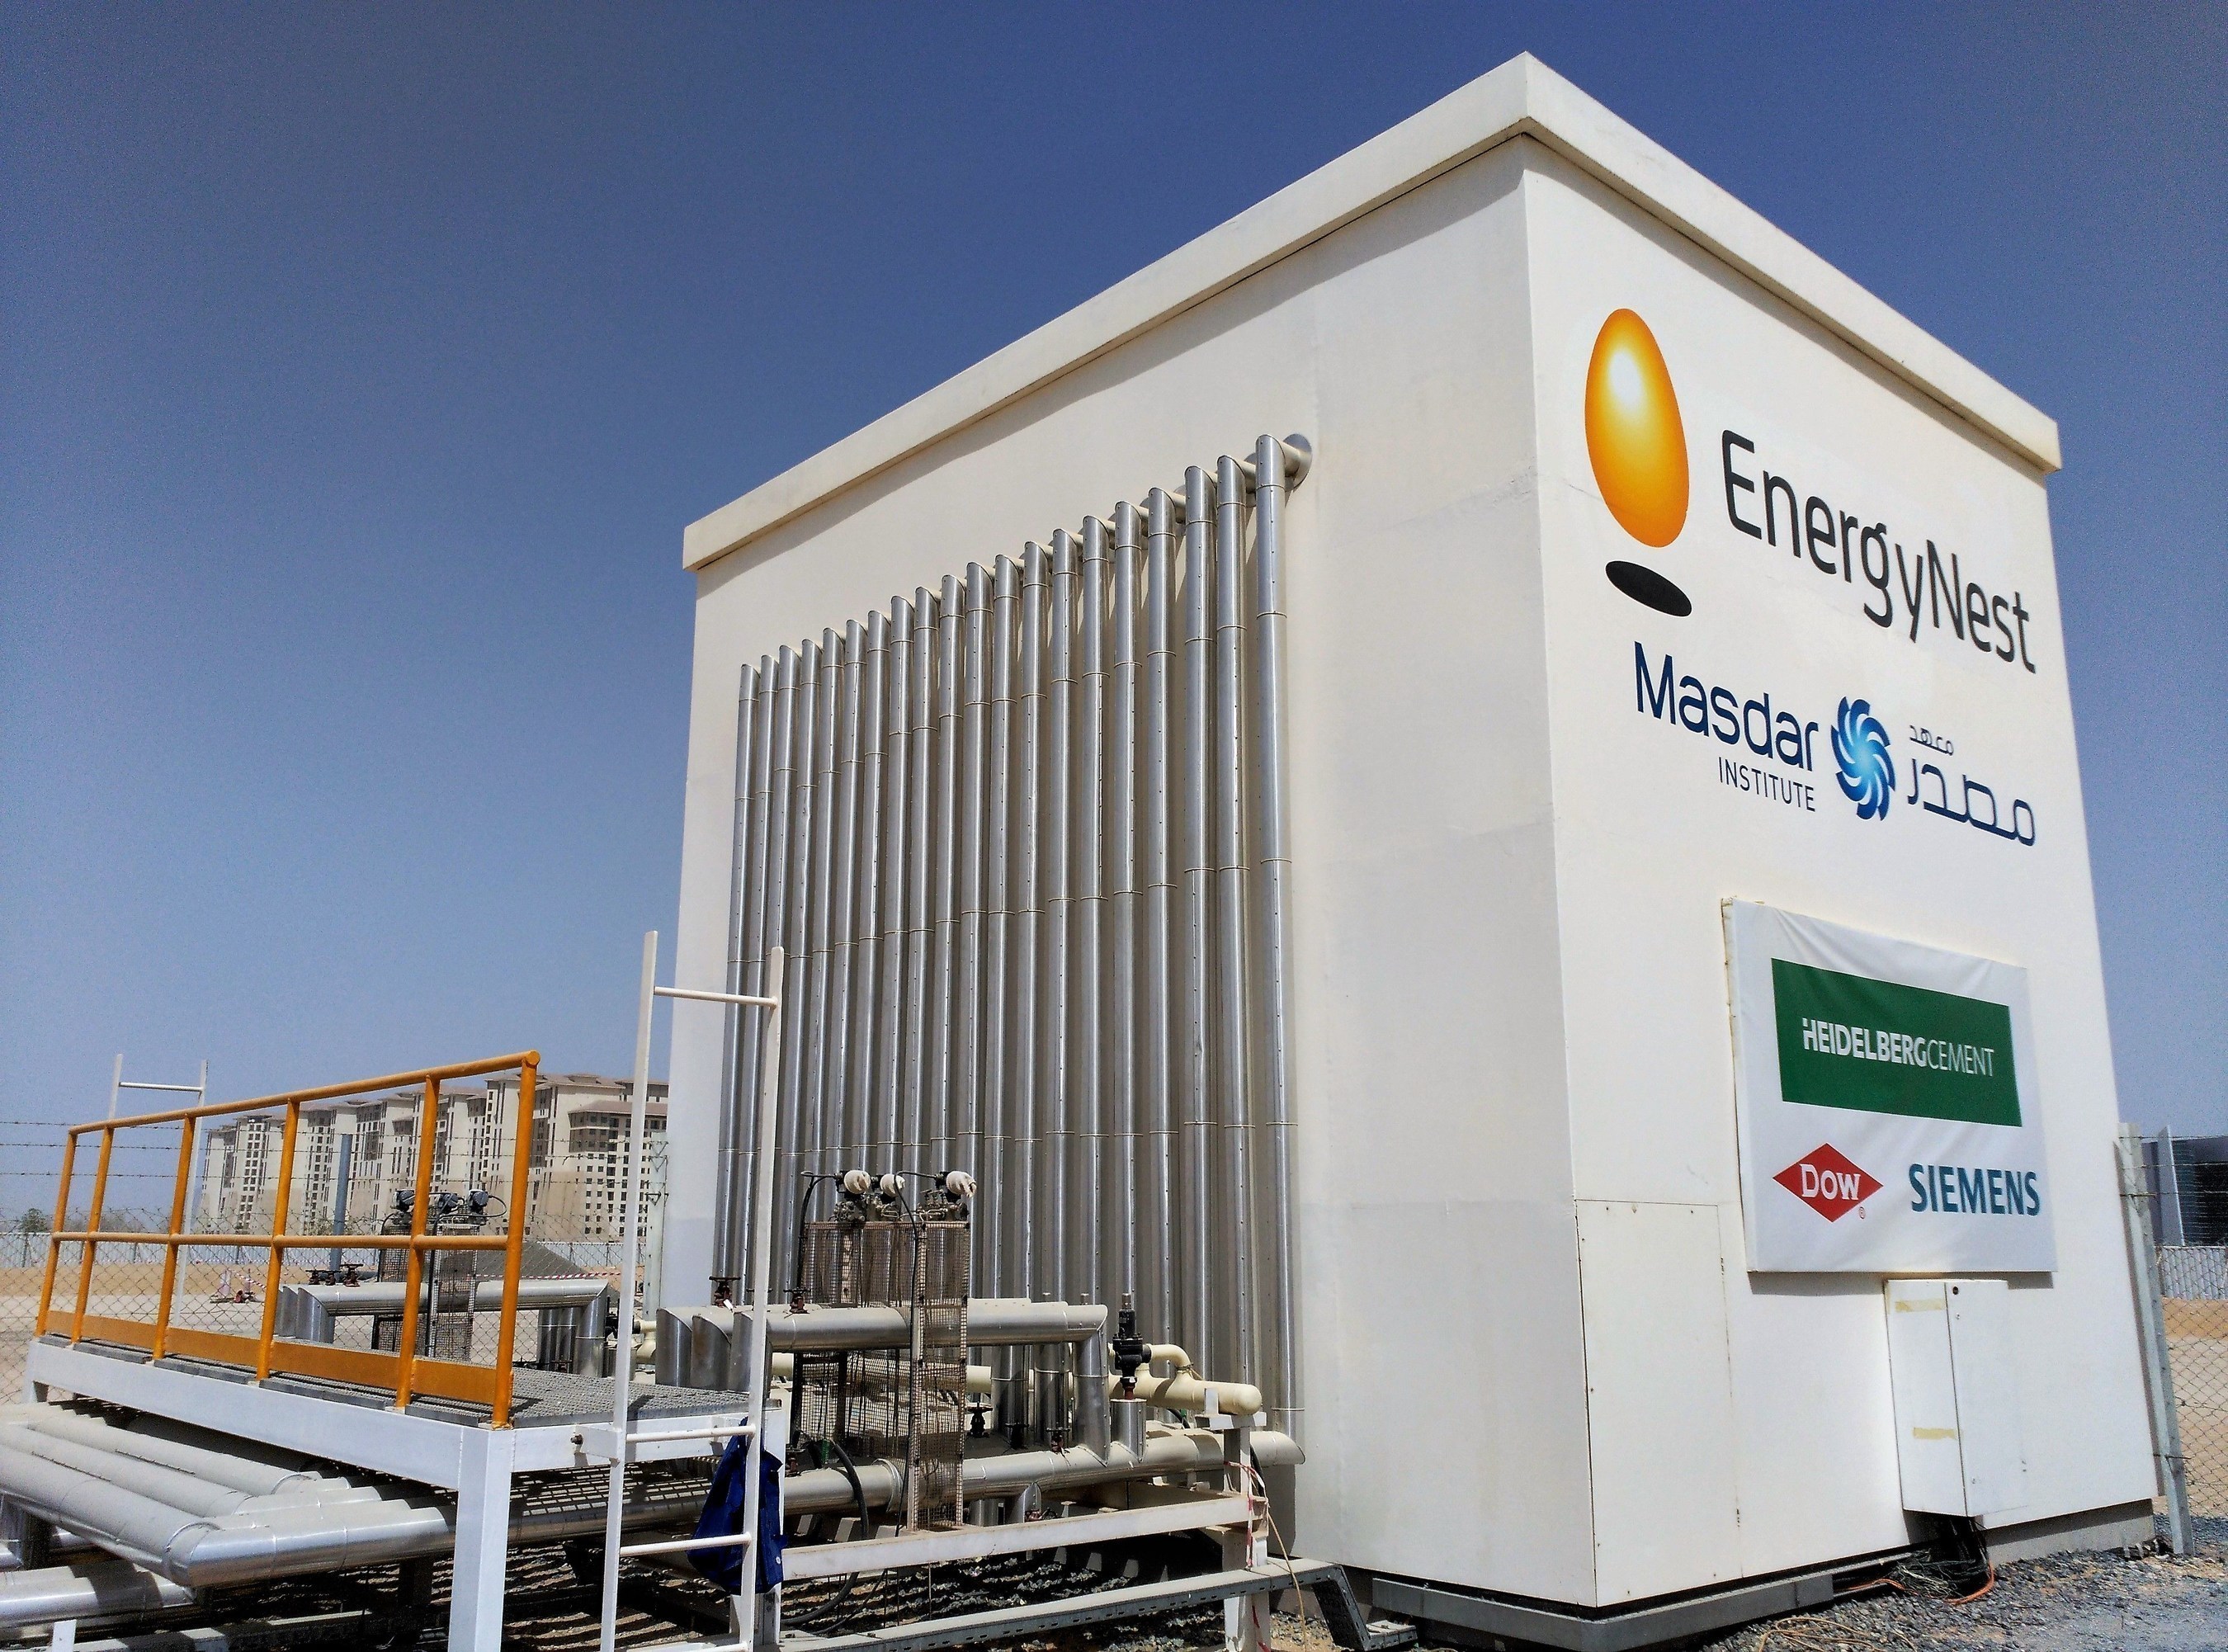 Masdar Institute and EnergyNest initiated a comprehensive joint research project in 2013 for building and testing a 2 x 500 kWhth Thermal Energy Storage (TES) pilot. The pilot facility is now fully operational and has been validated by DNV GL with regards to operating temperature, energy storage capacity, and energy efficiency. (PRNewsFoto/EnergyNest)